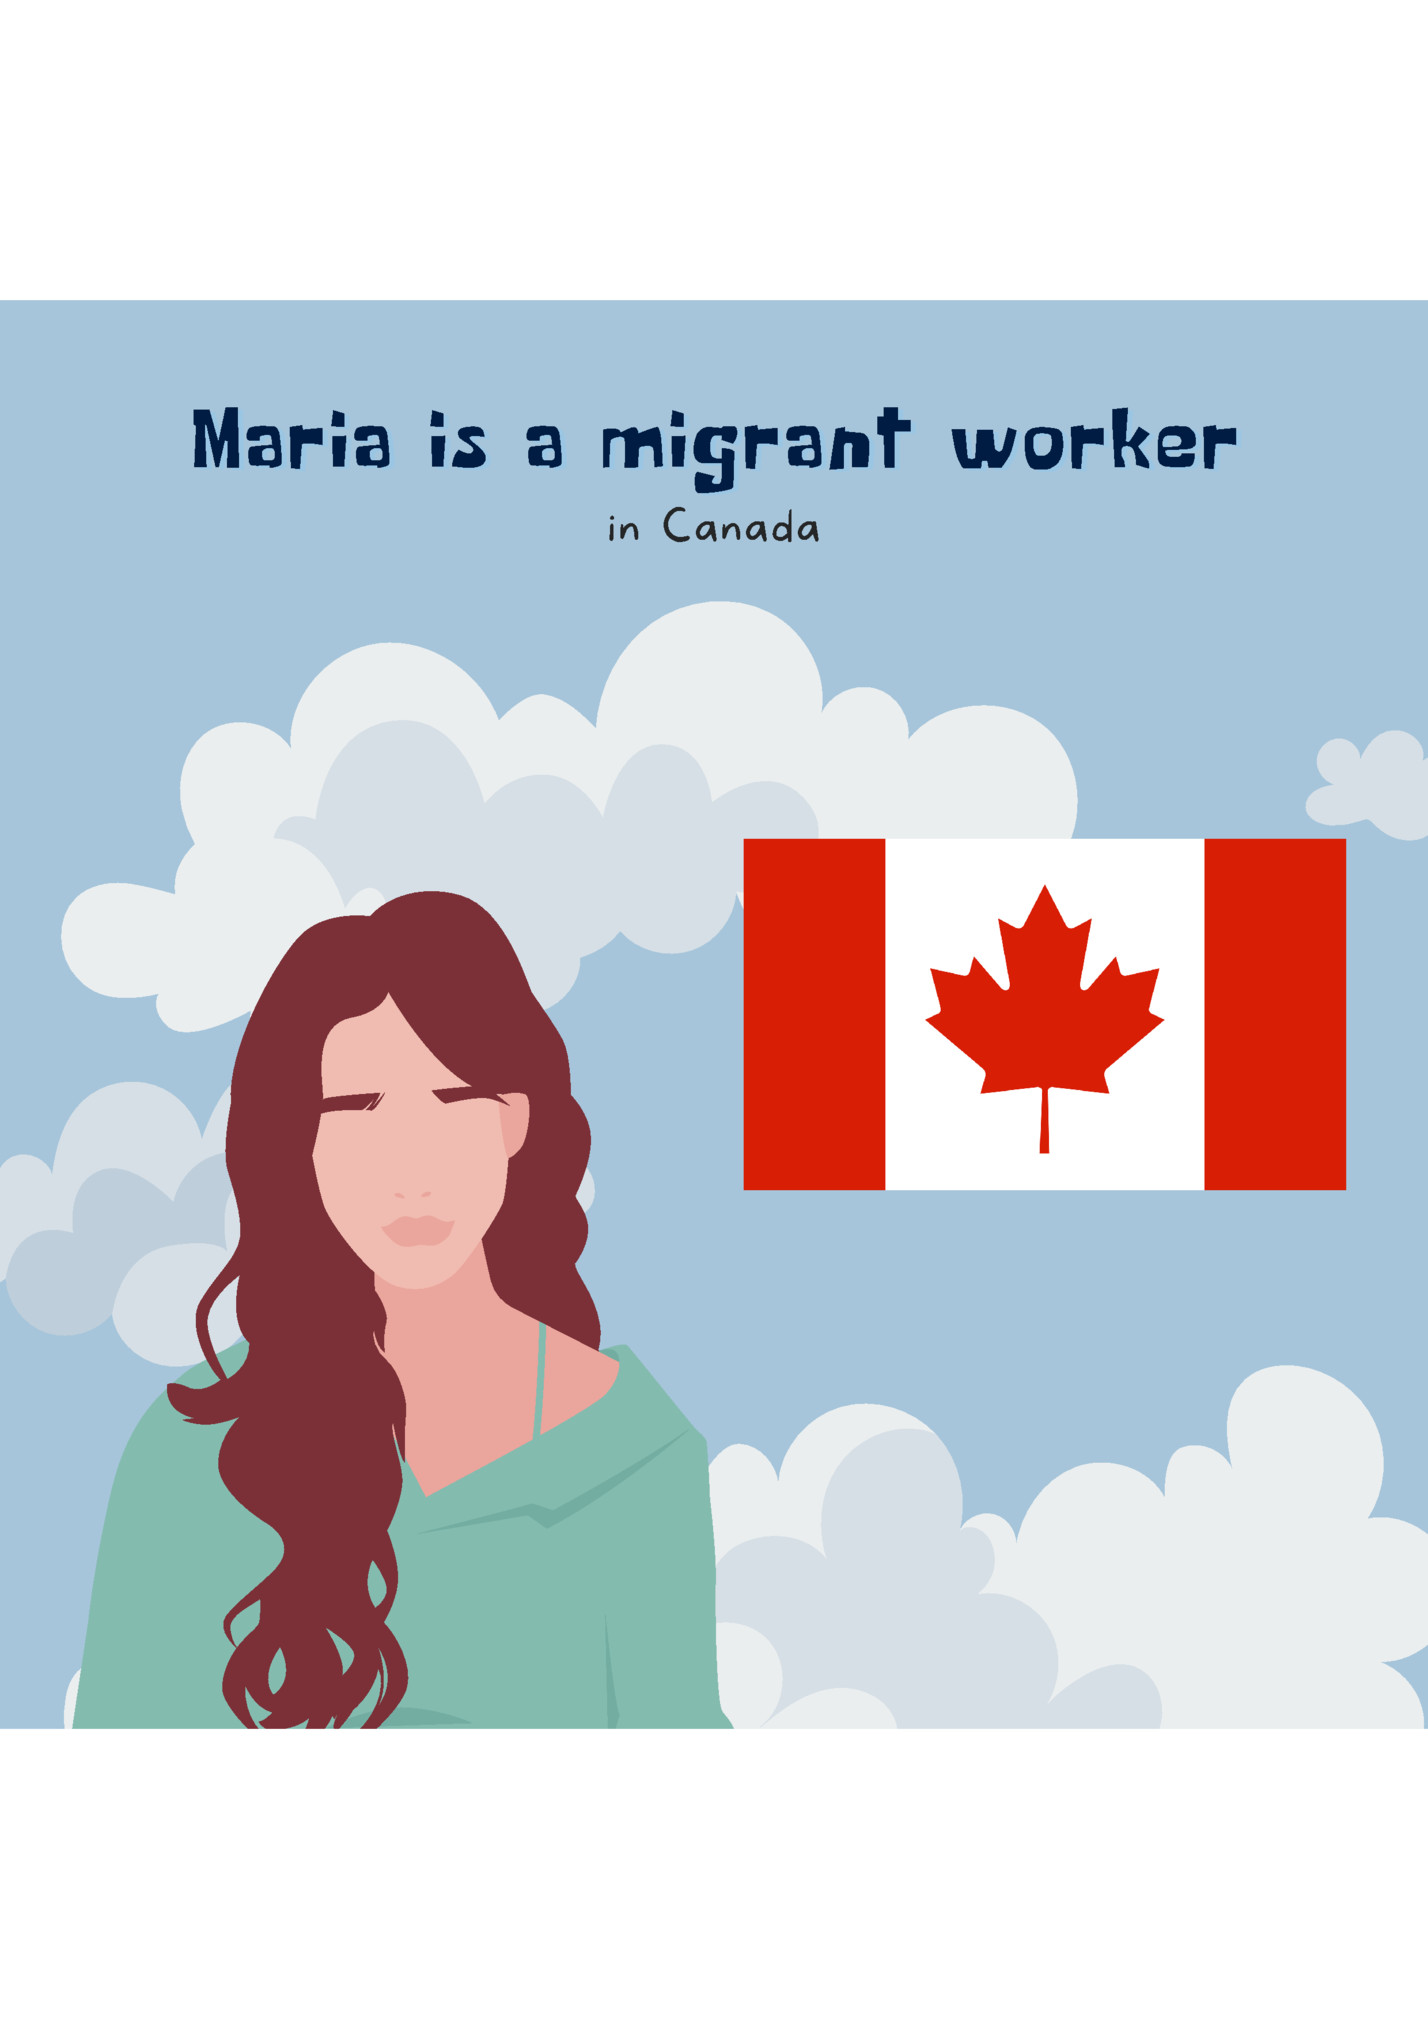 Maria is a migrant worker